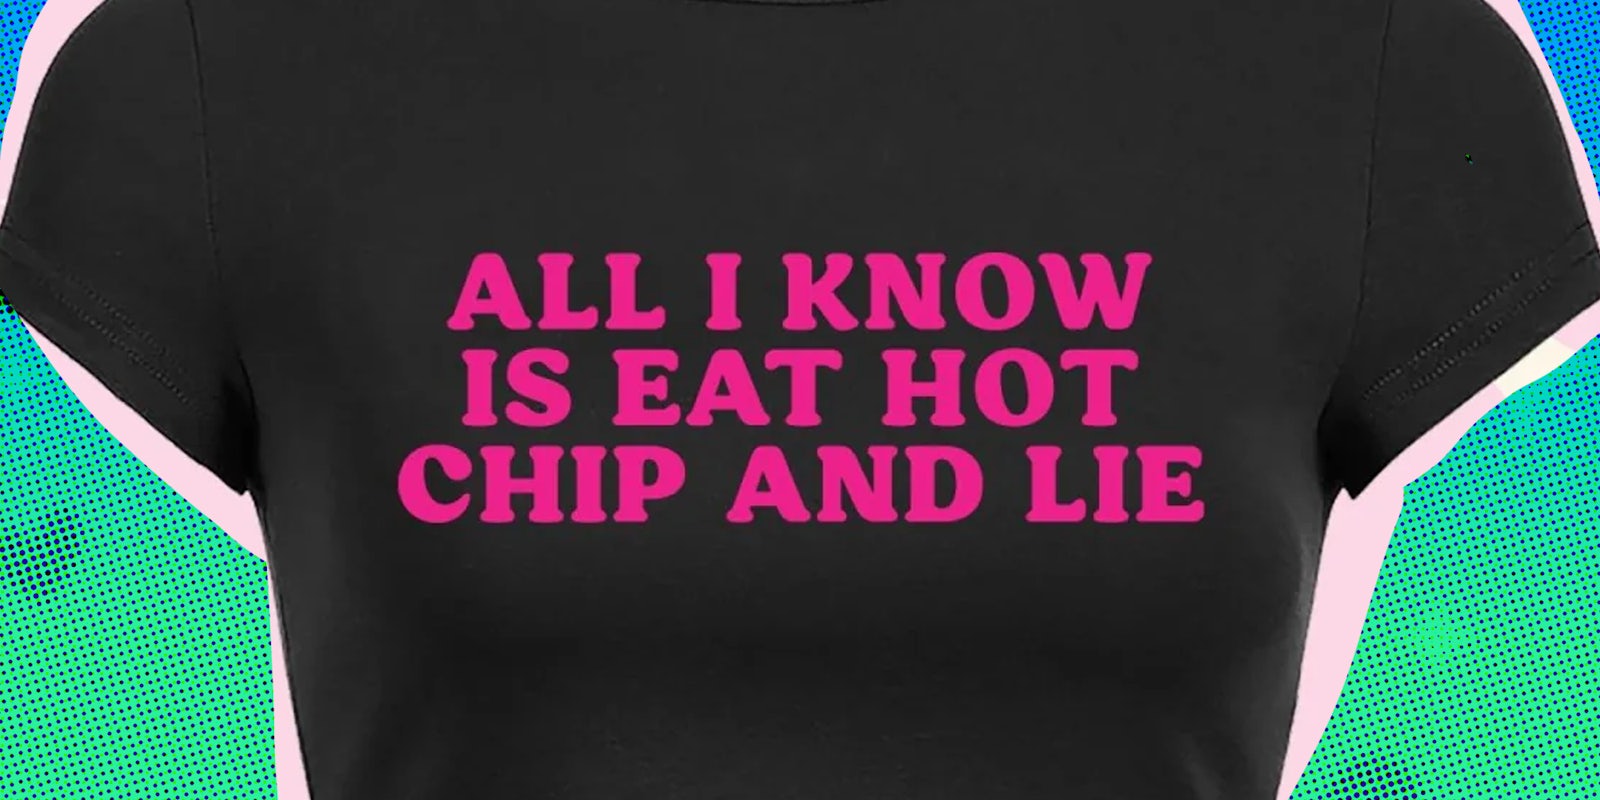 t shirt that says 'all i know is eat hot chip and lie'